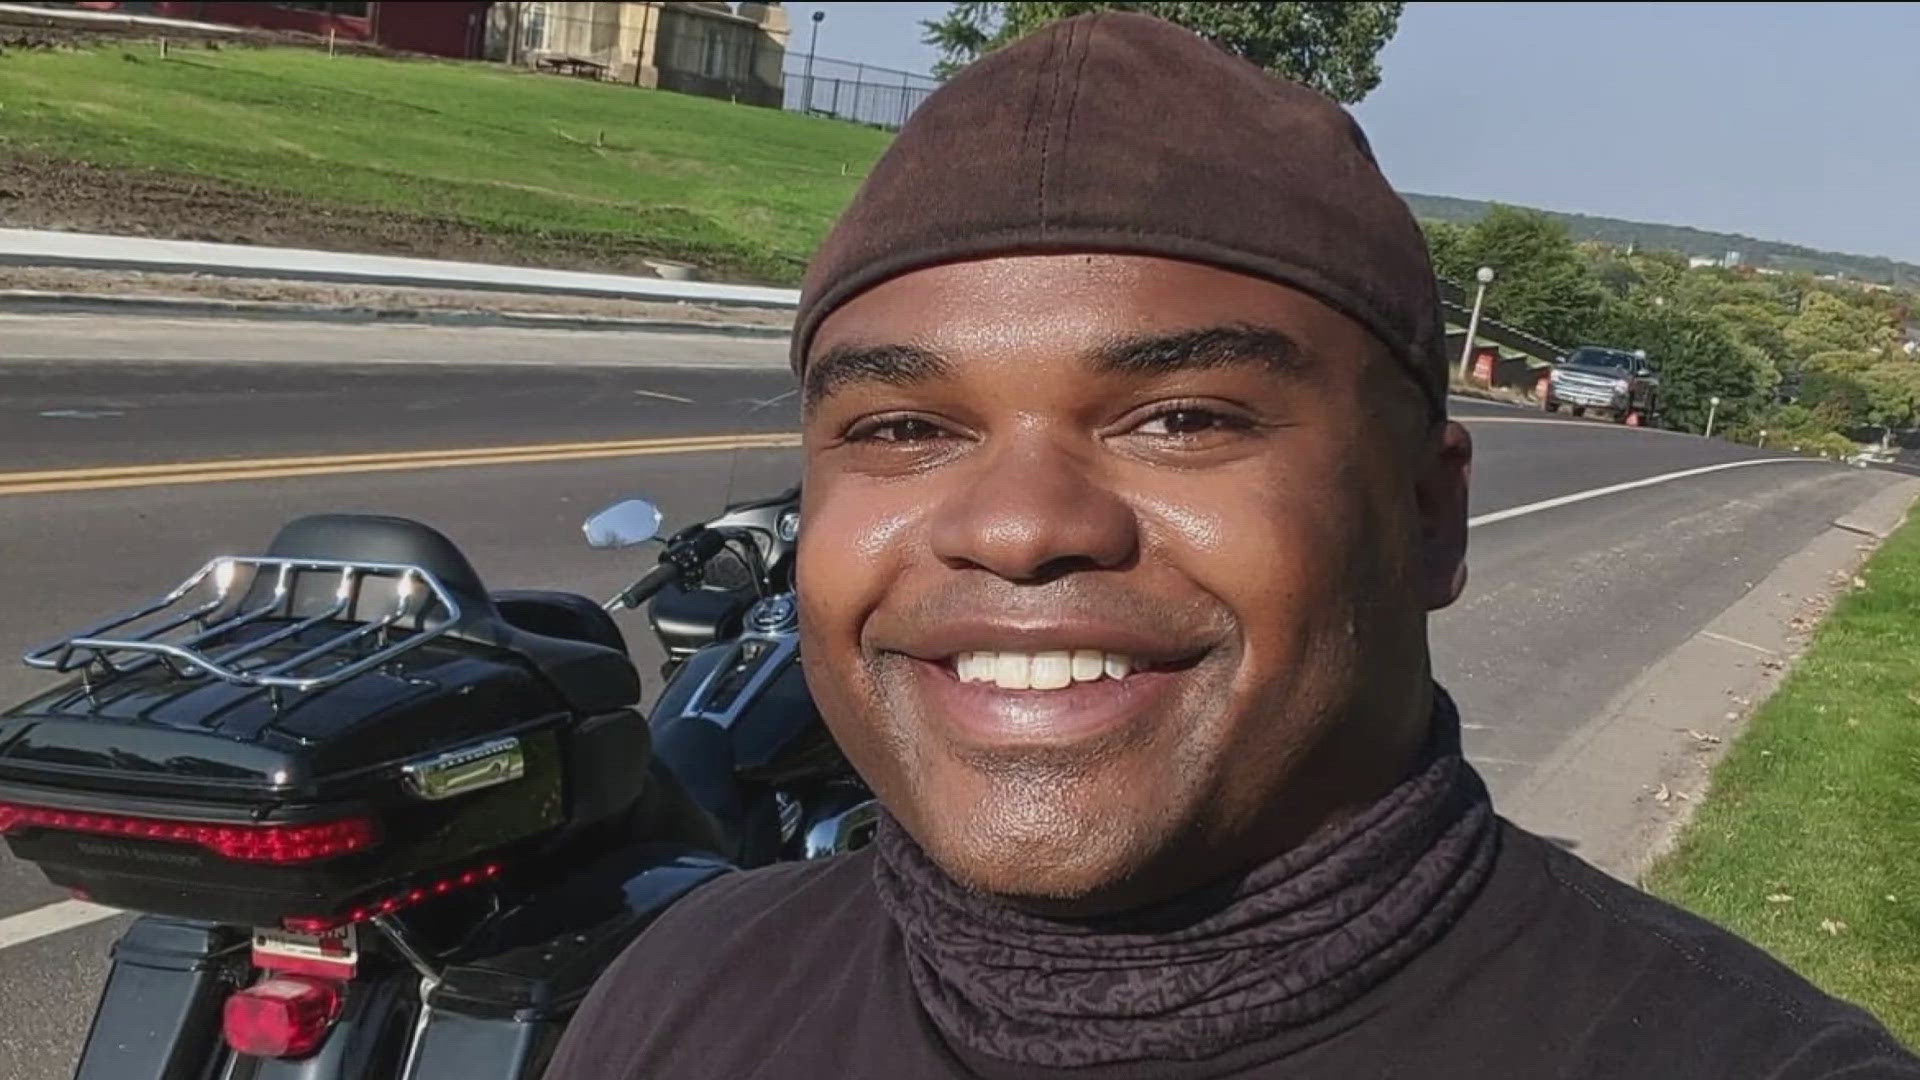 Joseph C. Johns was fatally shot while off-duty on Sunday. Besides his work as a firefighter, Johns was part of the TRU Breed Motorcycle Club.